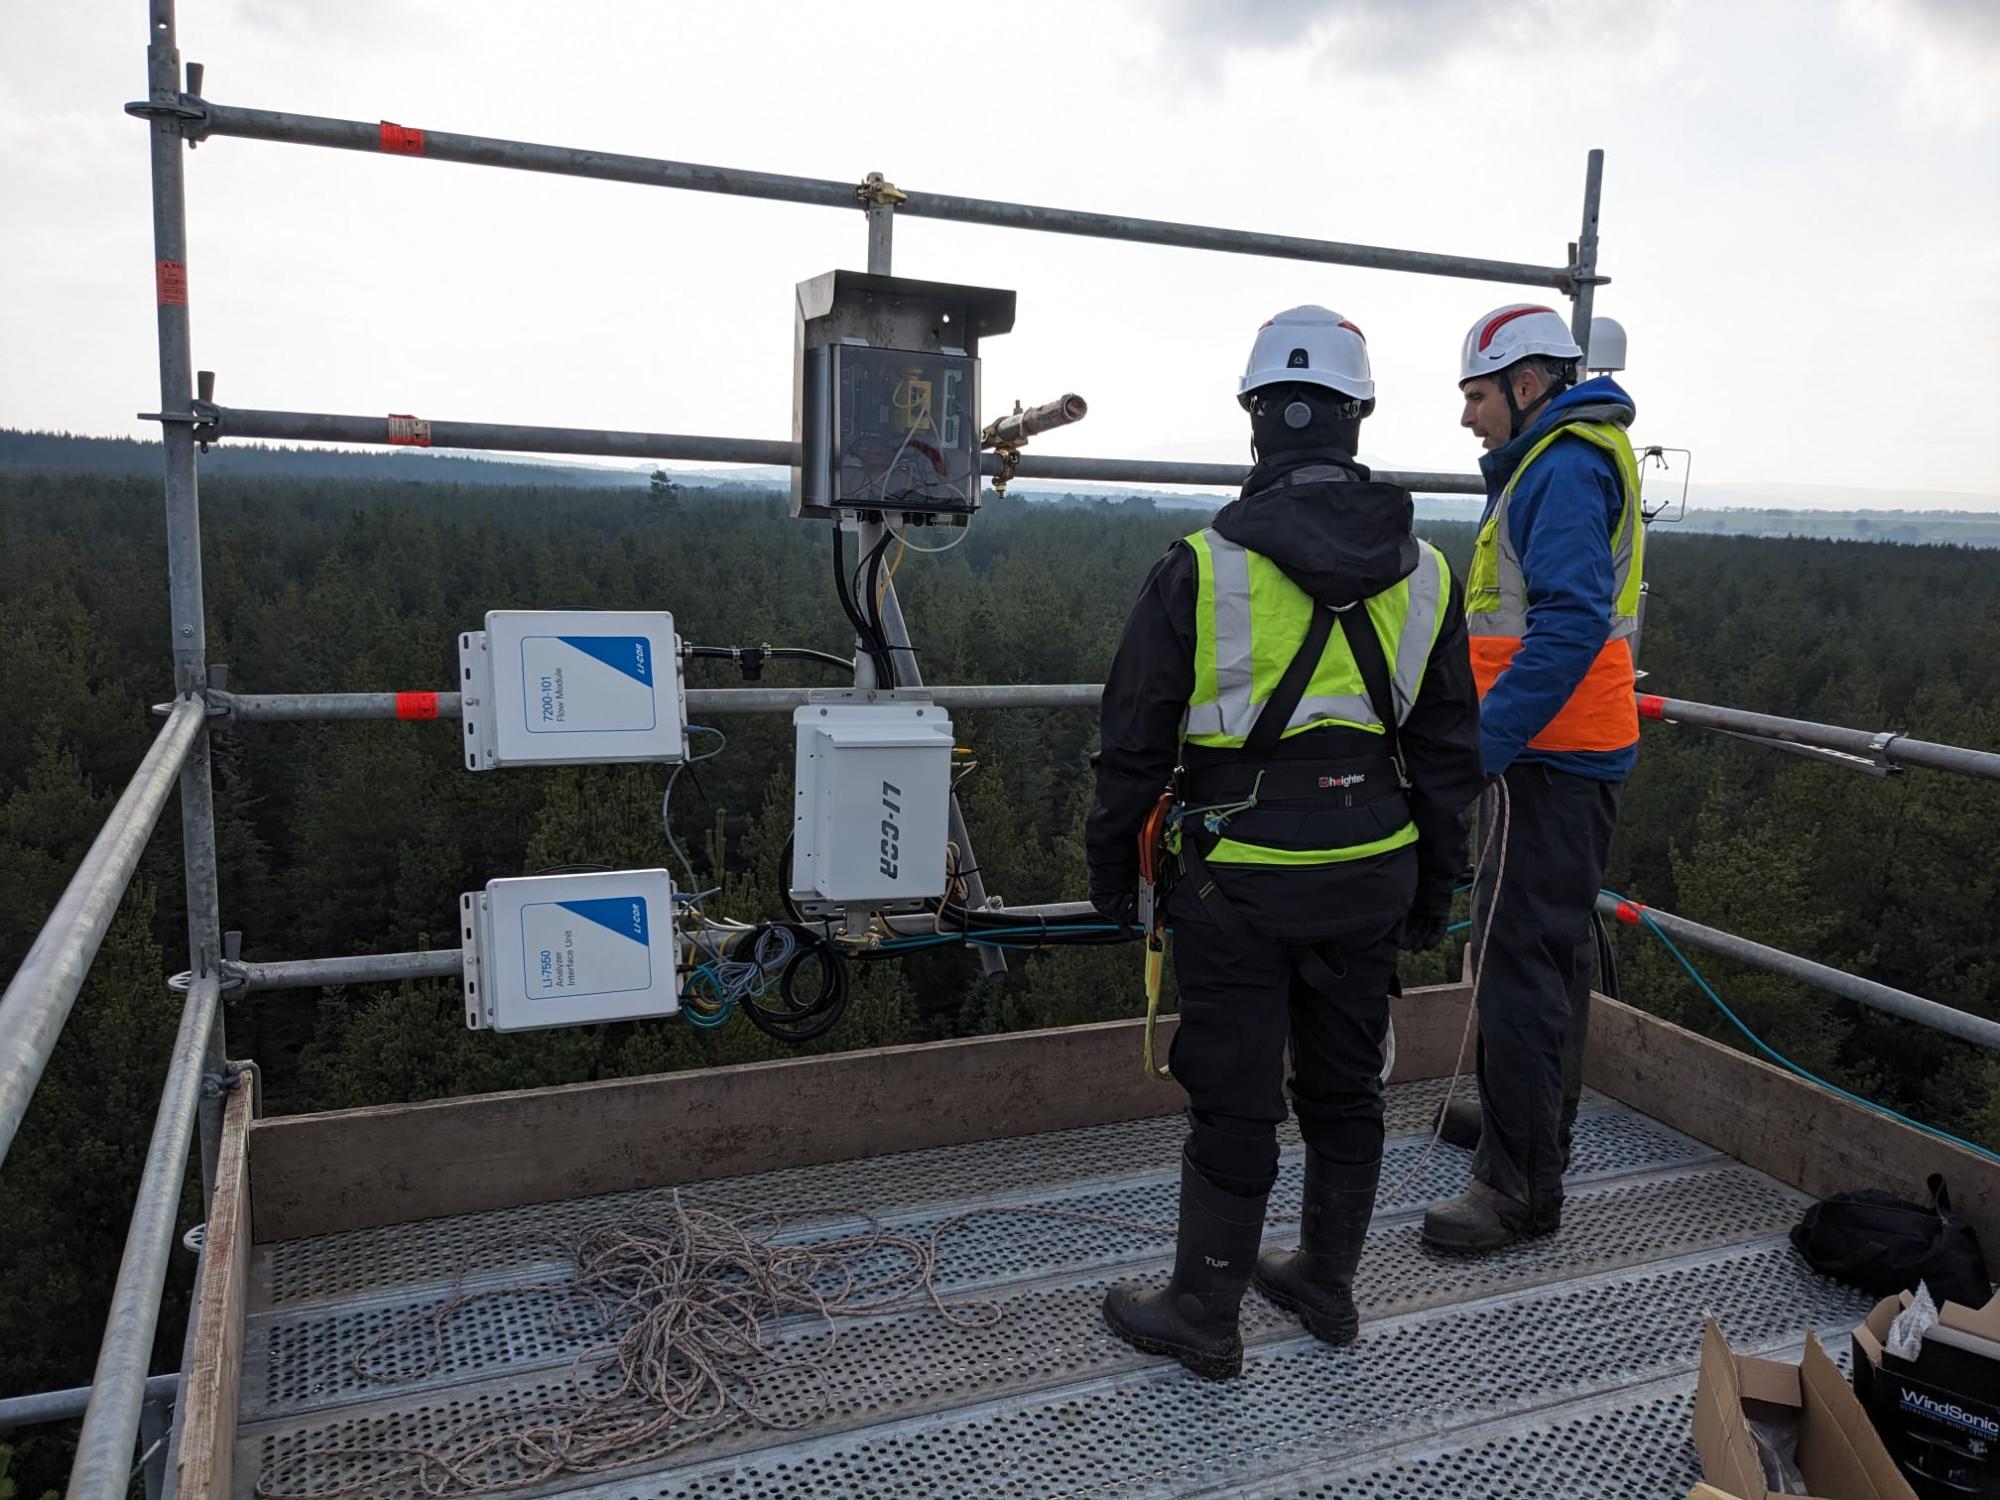 Image showing two people standing gat the top of the flux tower scaffold looking at the monitoring equipment with a view over the plantation.